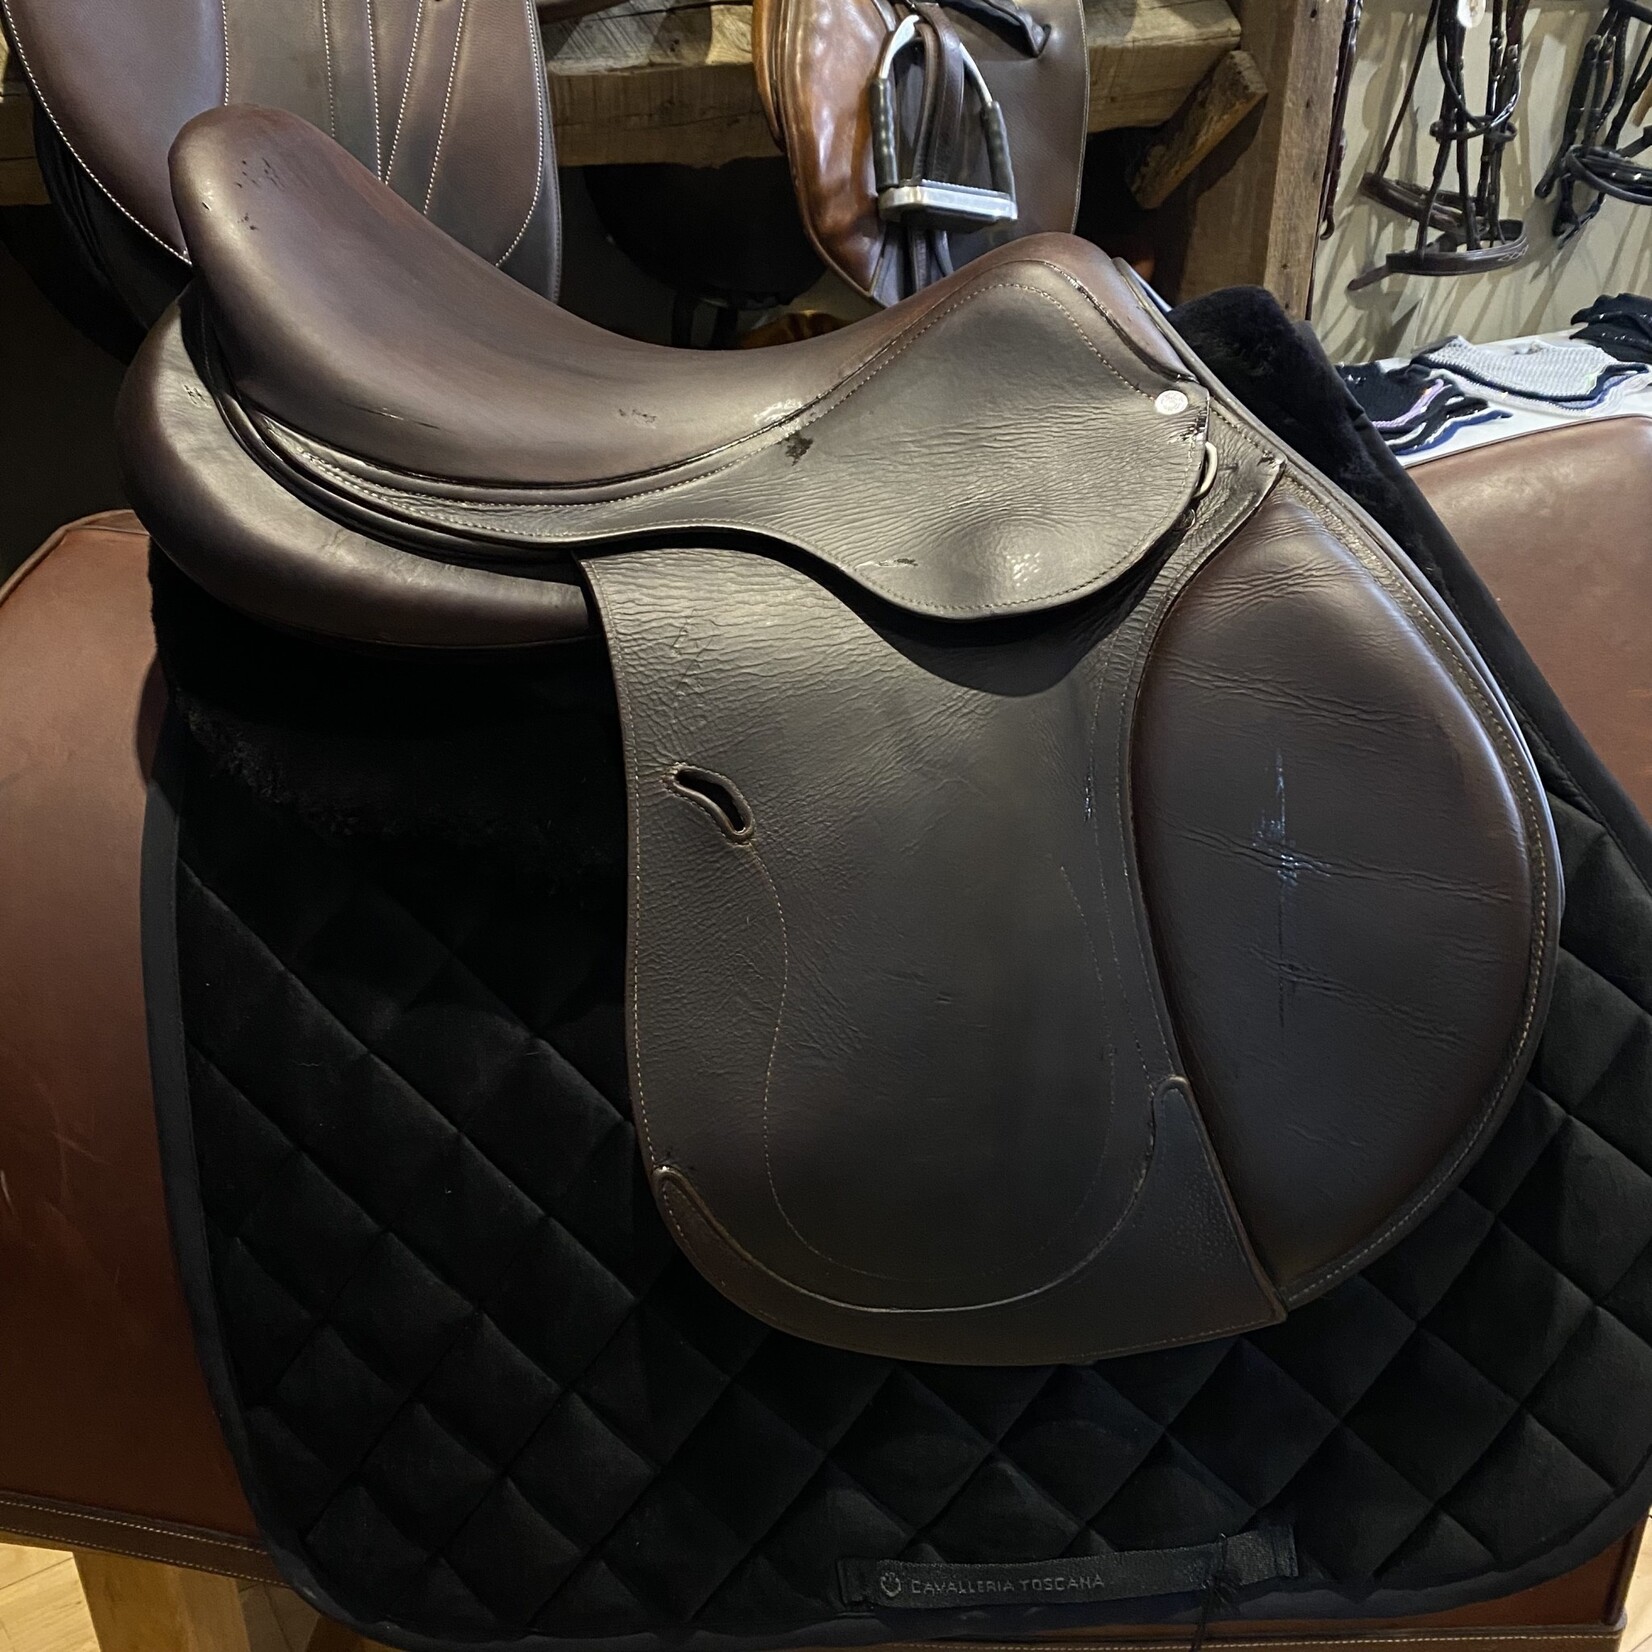 #19 1546 Antares, 18L seat (deep)  Comfort 2 Jumping Saddle, 3 A flap, full buffalo, shoulder freedom panels, cover included